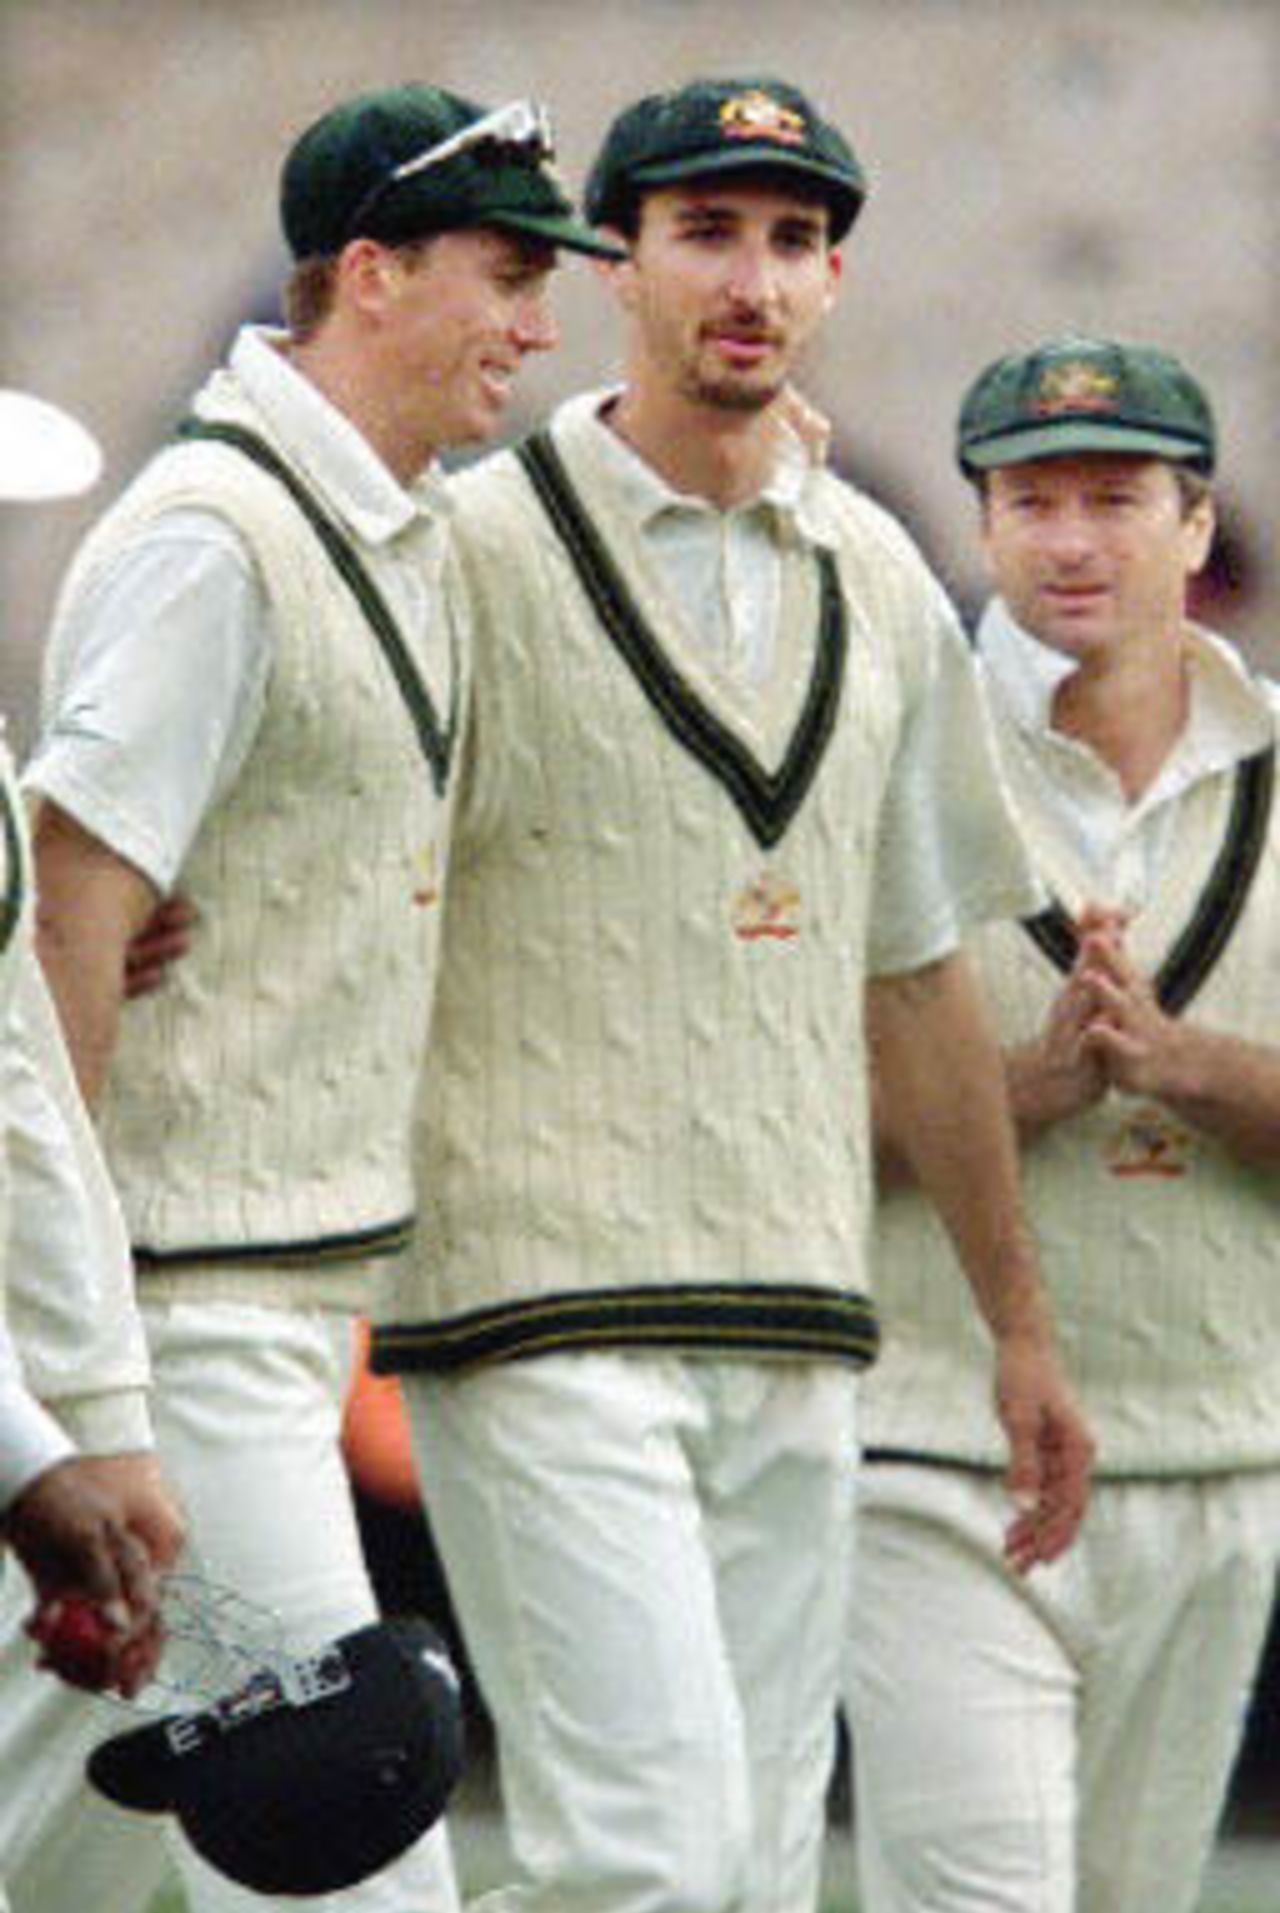 Australian paceman Jason Gillespie (C) is congratulated by fellow paceman Glenn McGrath (L) and captain Steve Waugh (R) after capturing three quick West Indian wicket late on the third day of the fourth Test Match at the MCG in Melbourne 28 December 2000. Australia declared their second innings close at 262-5 and at stumps the West Indies are again in deep trouble at 10-3 chasing 462 to win.